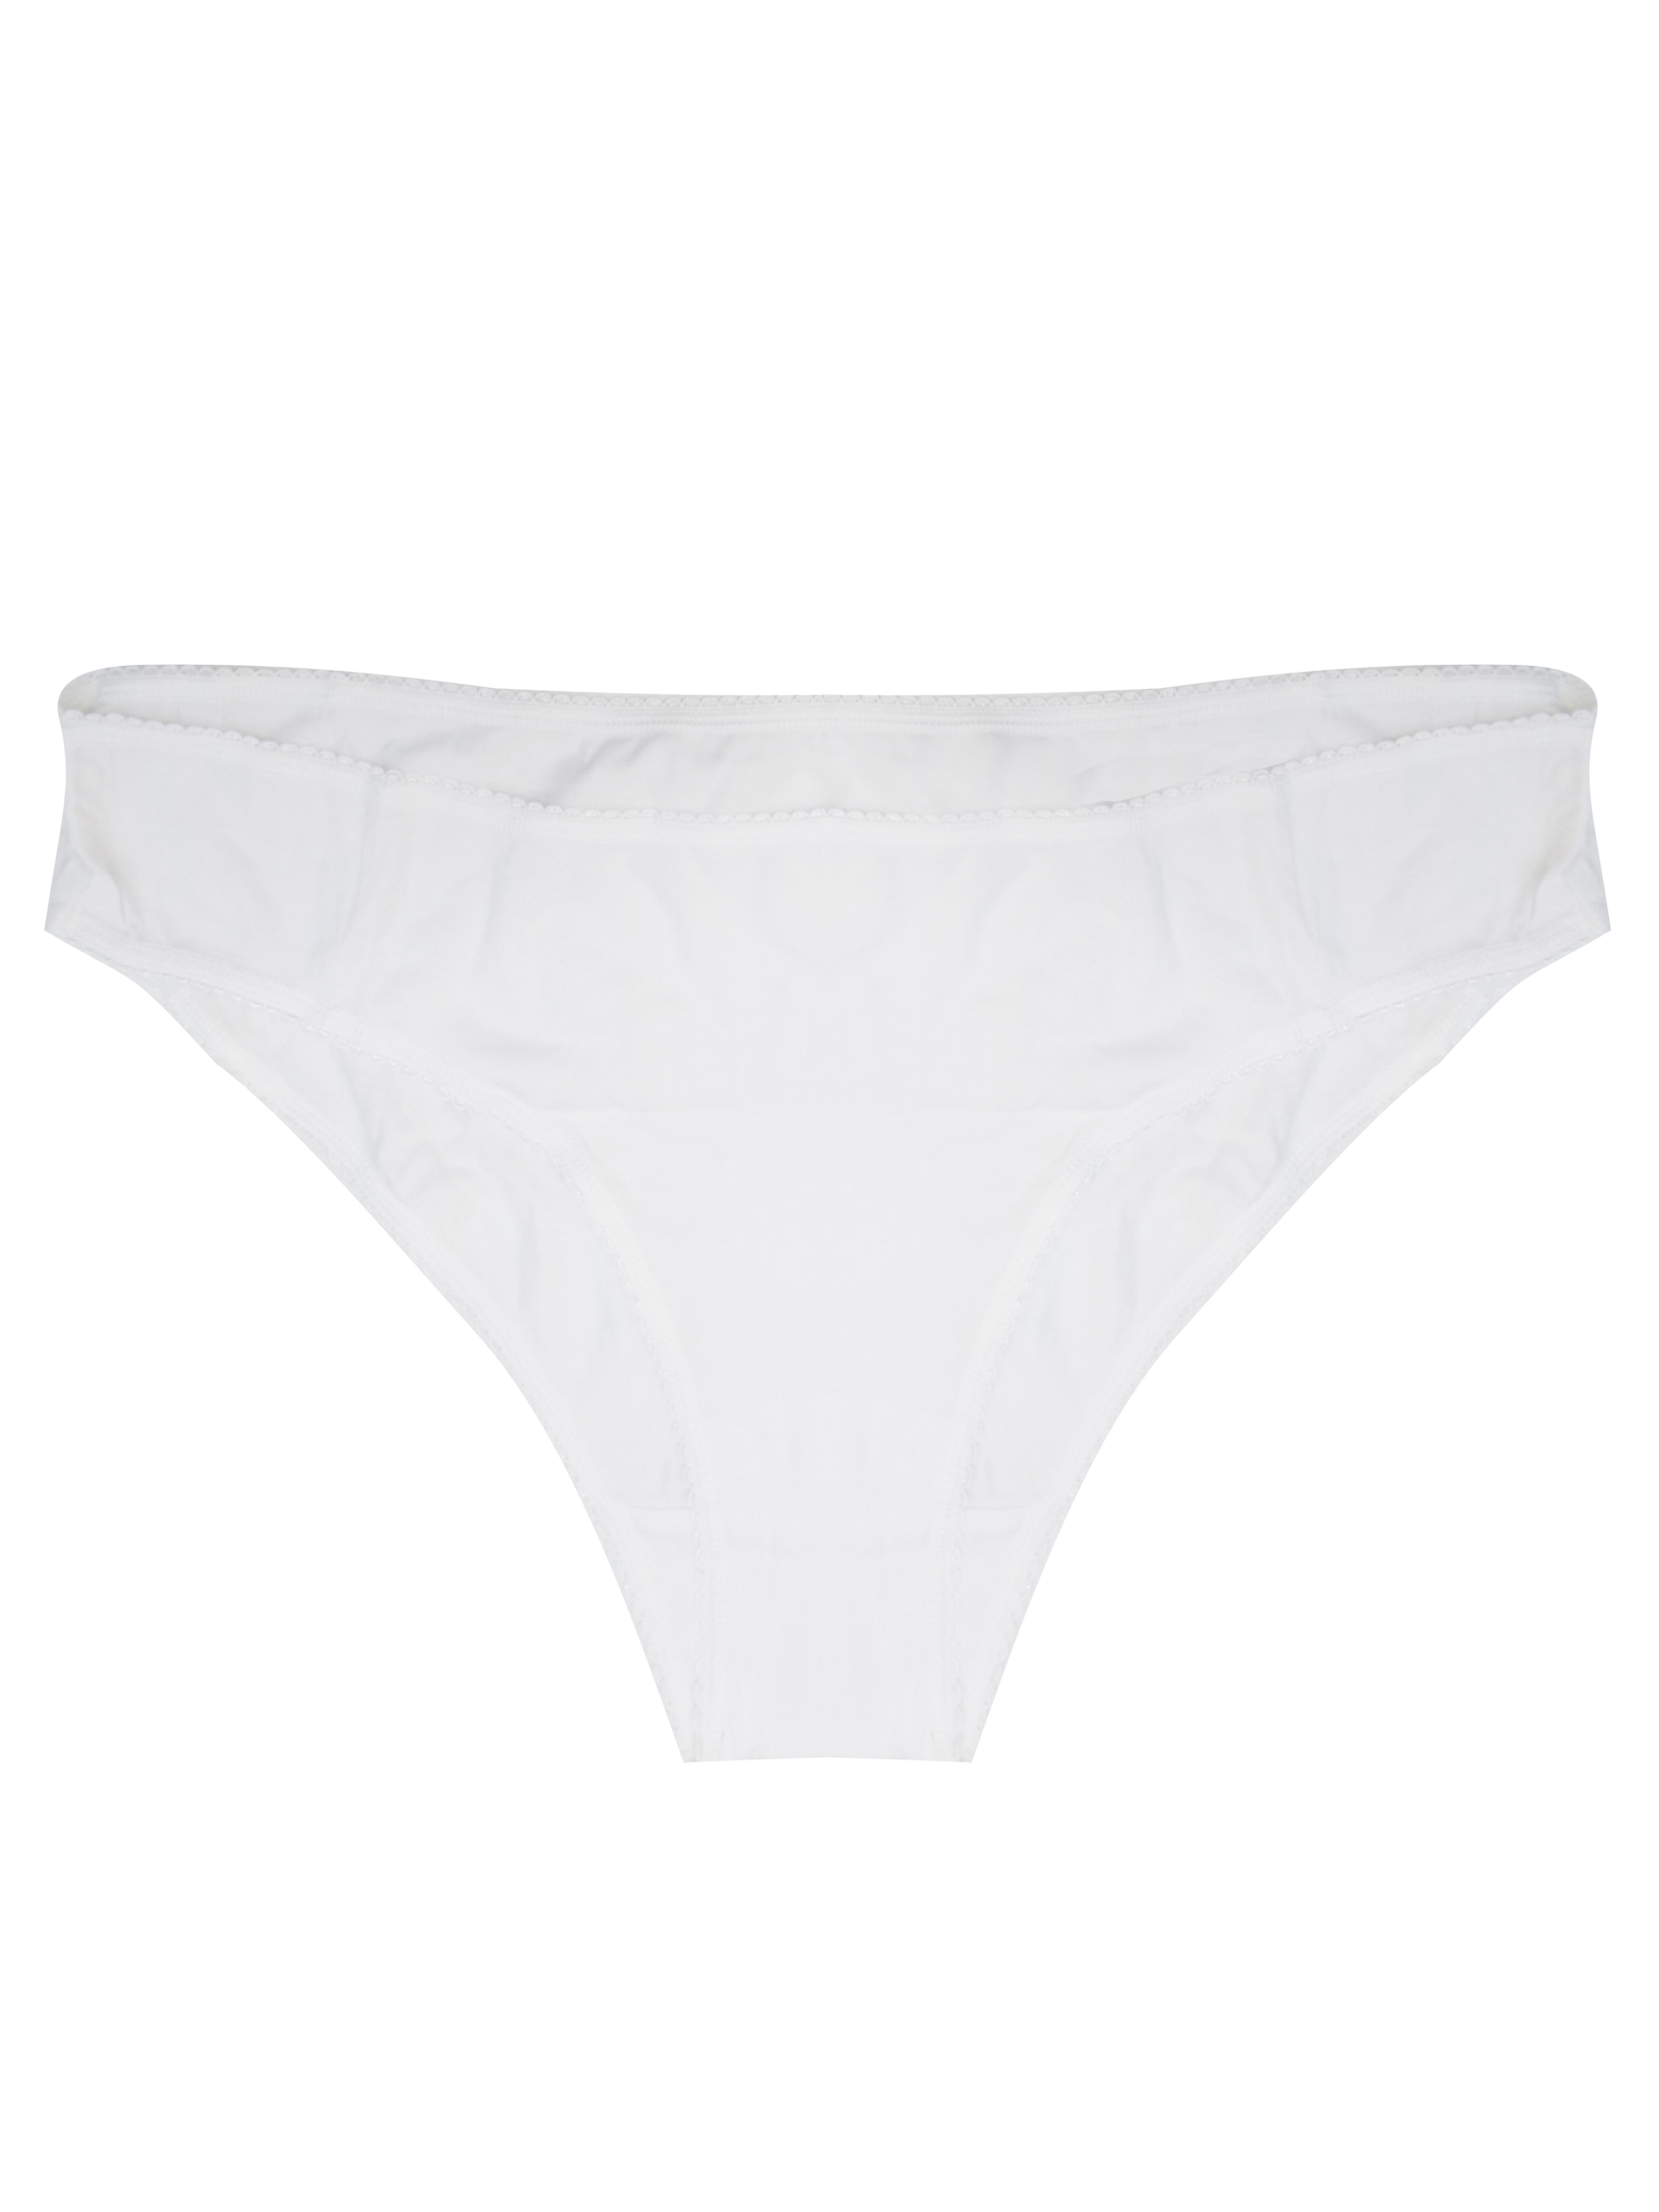 Marks and Spencer - - M&5 WHITE Cotton Rich Brazilian Knickers - Plus ...